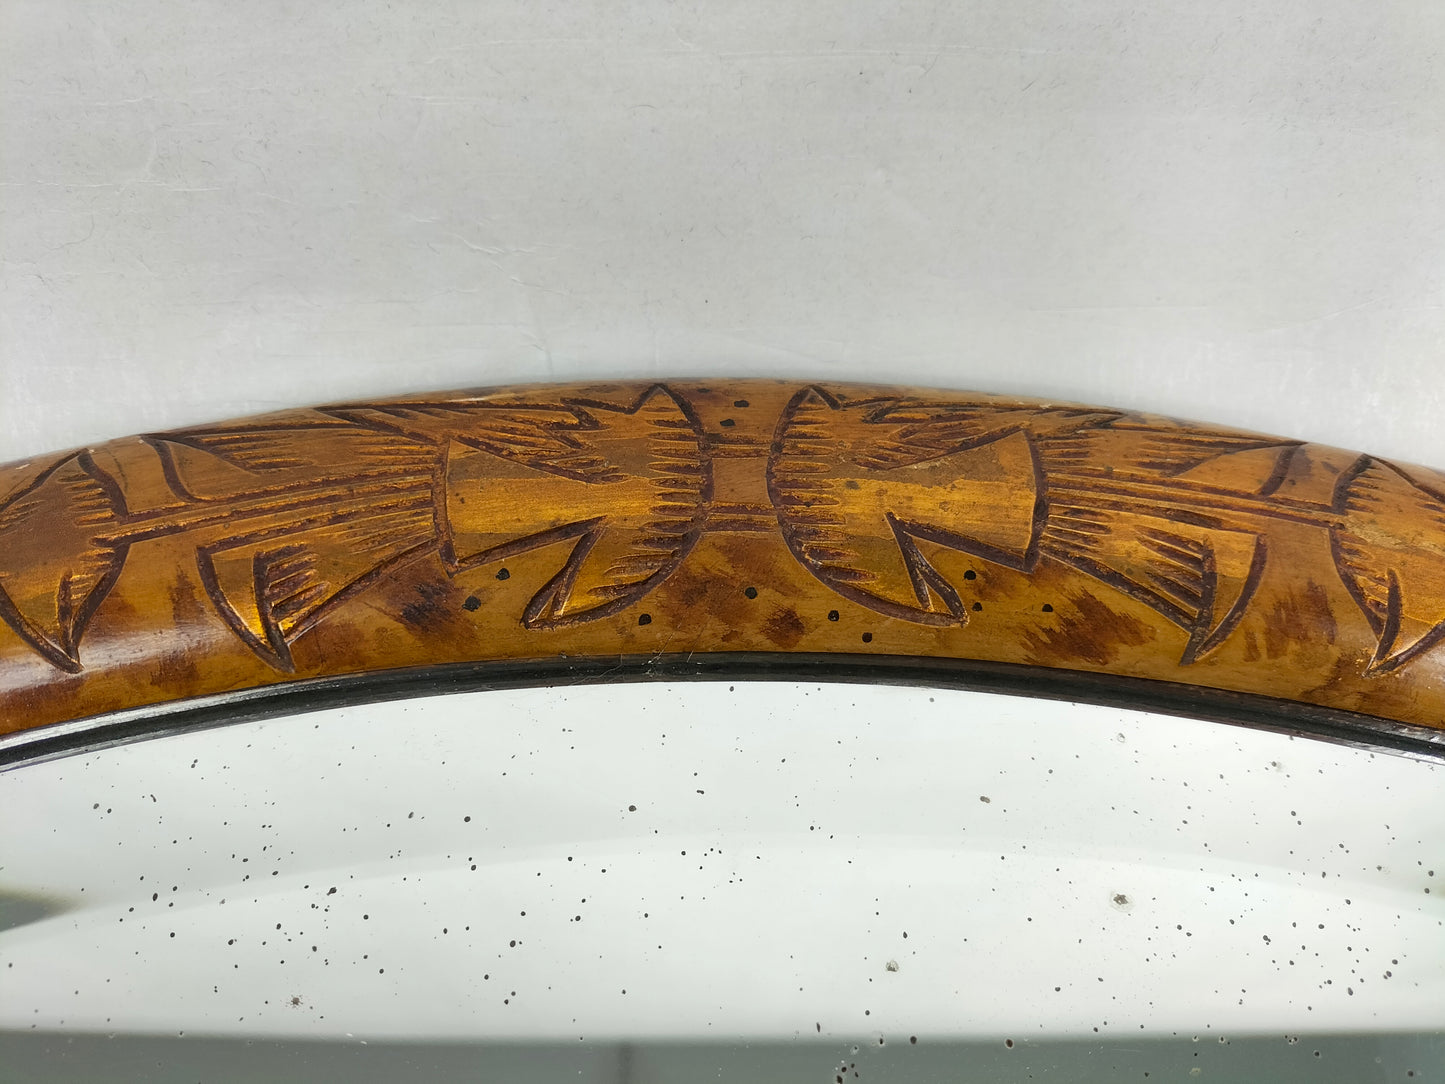 French oval art deco mirror with stylized wood carving // 1930-1950